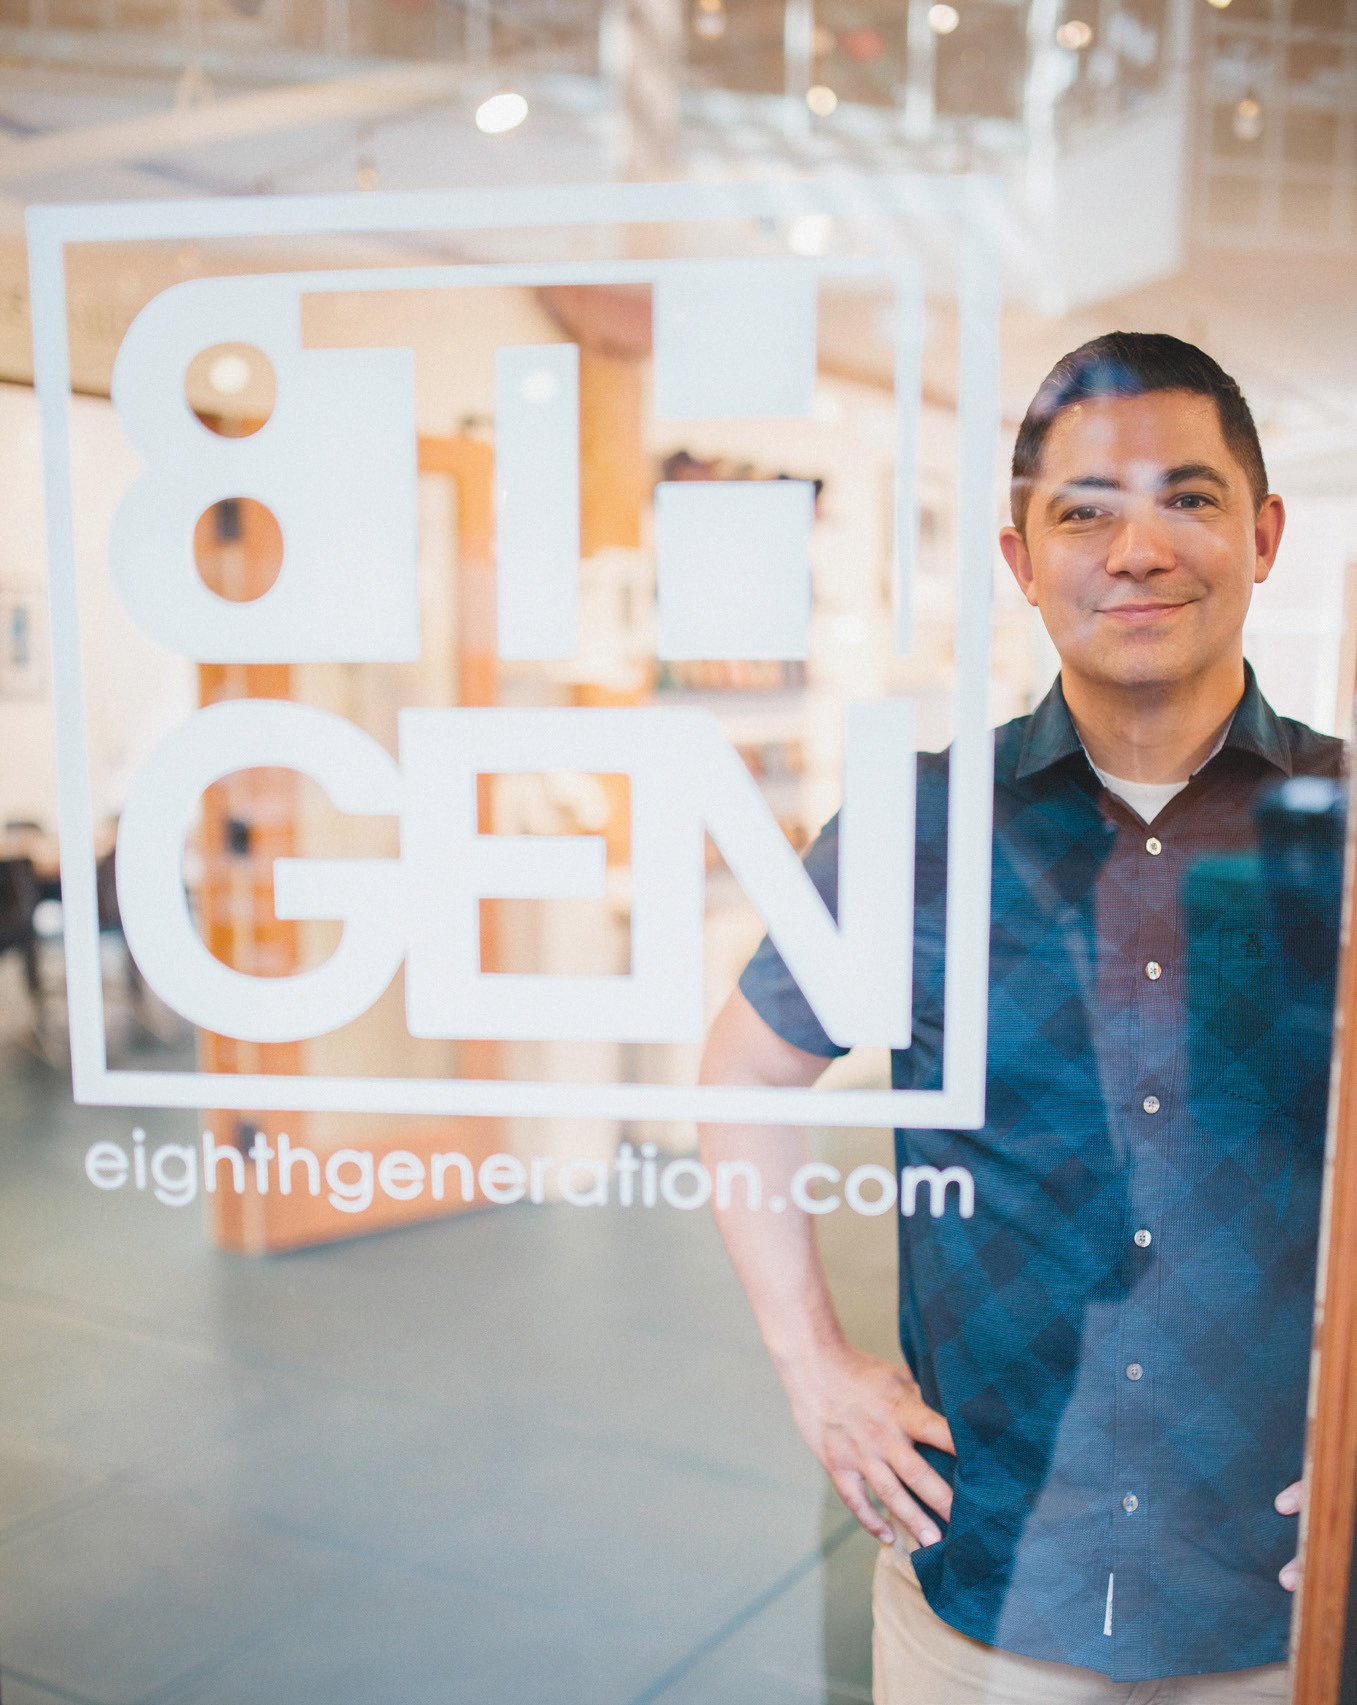 Louie Gong’s Seattle-based fashion and lifestyle brand Eighth Generation has a mostly Native staff.